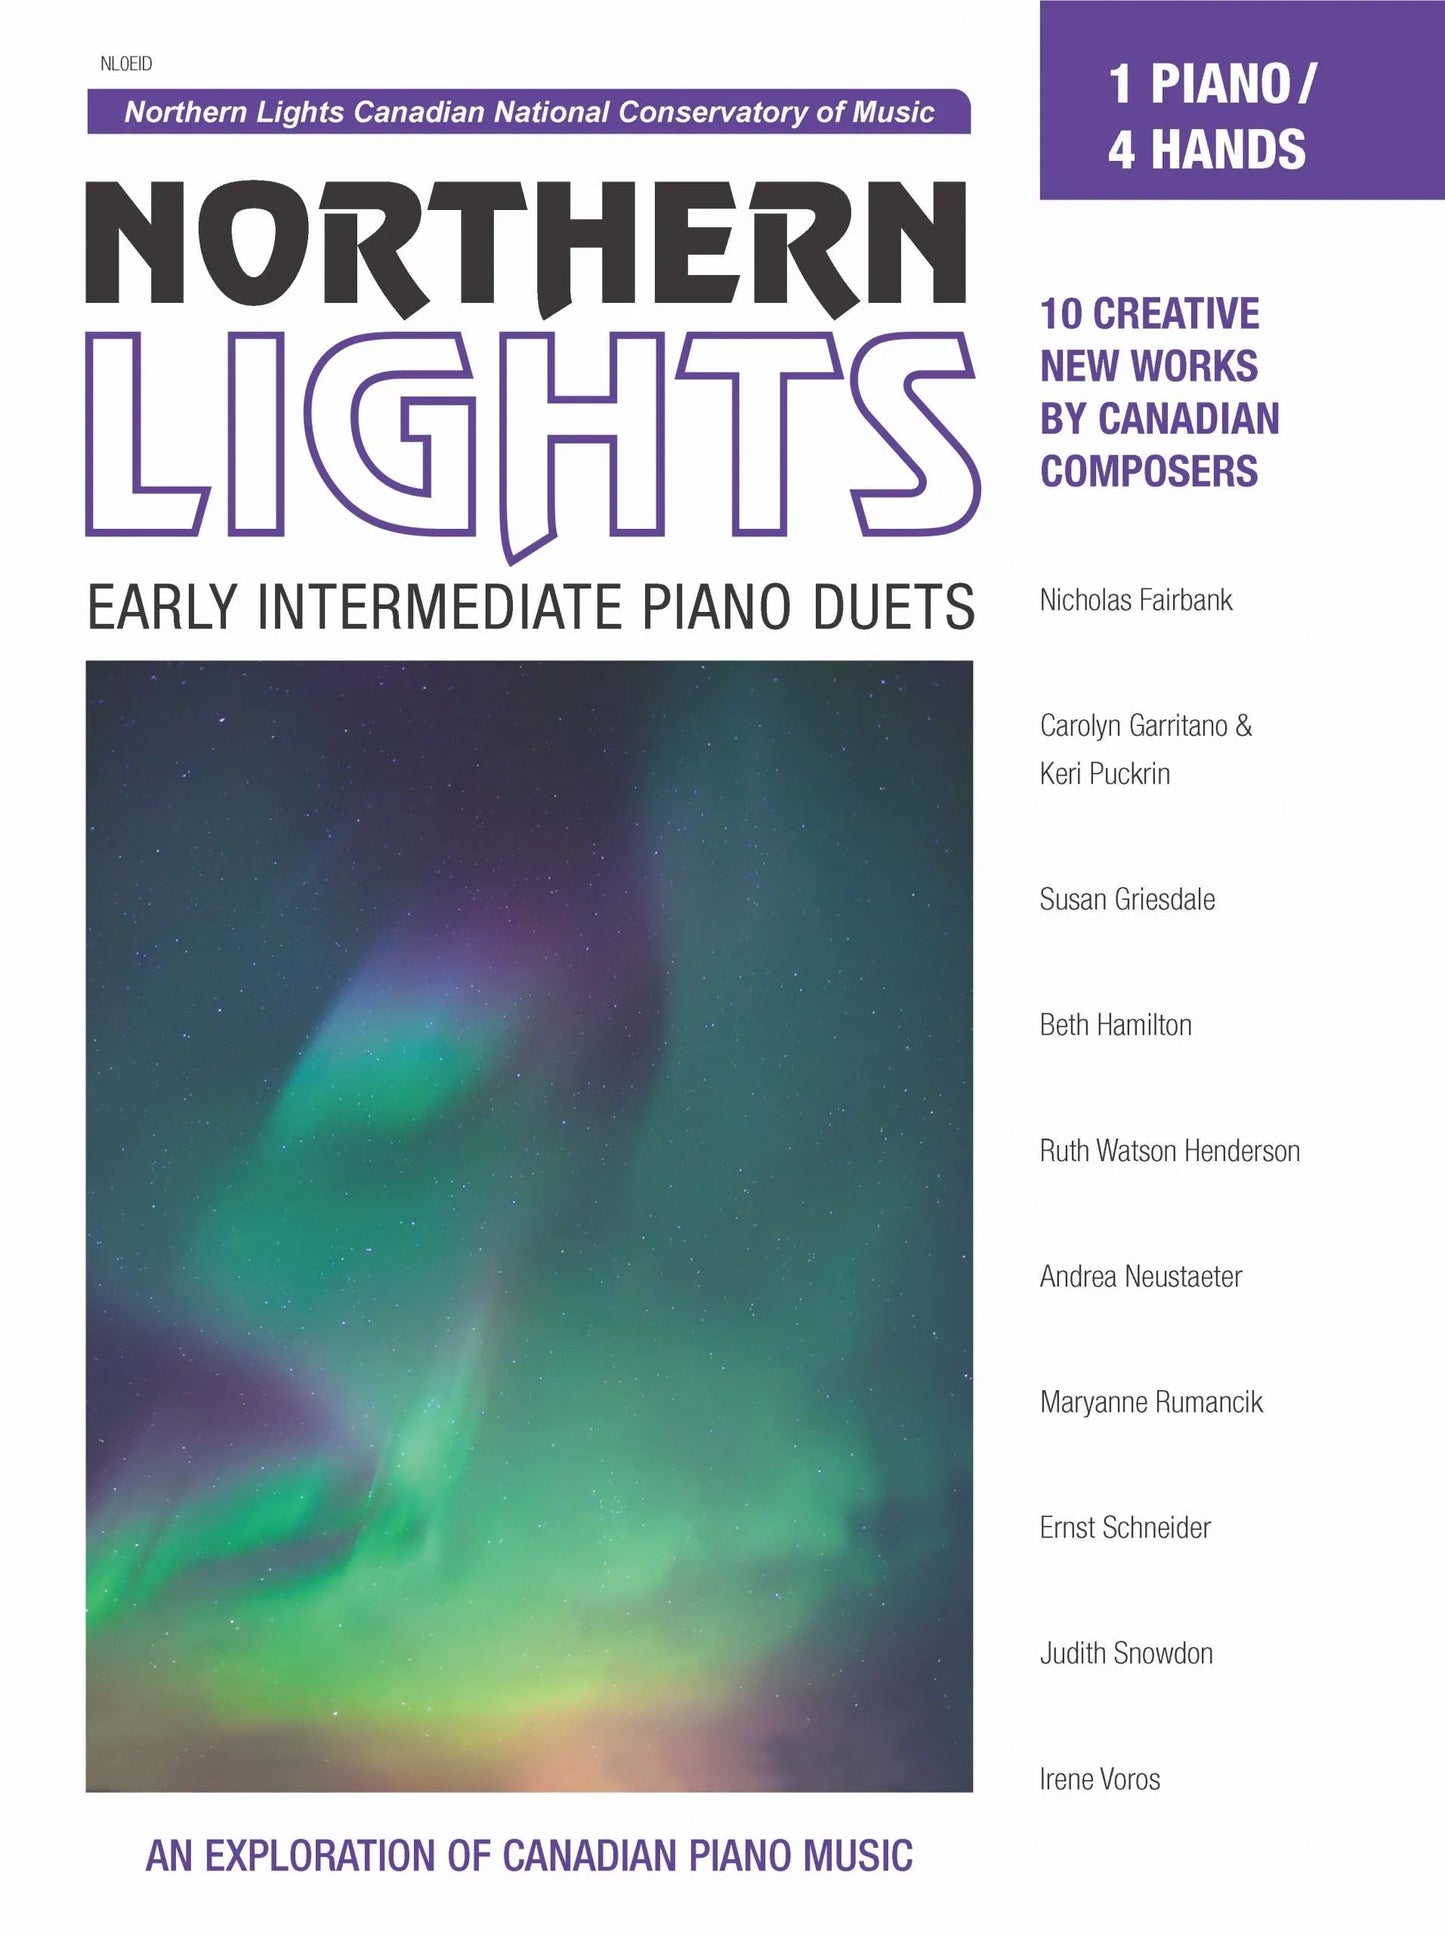 Northern Lights Early Intermediate Piano Duets